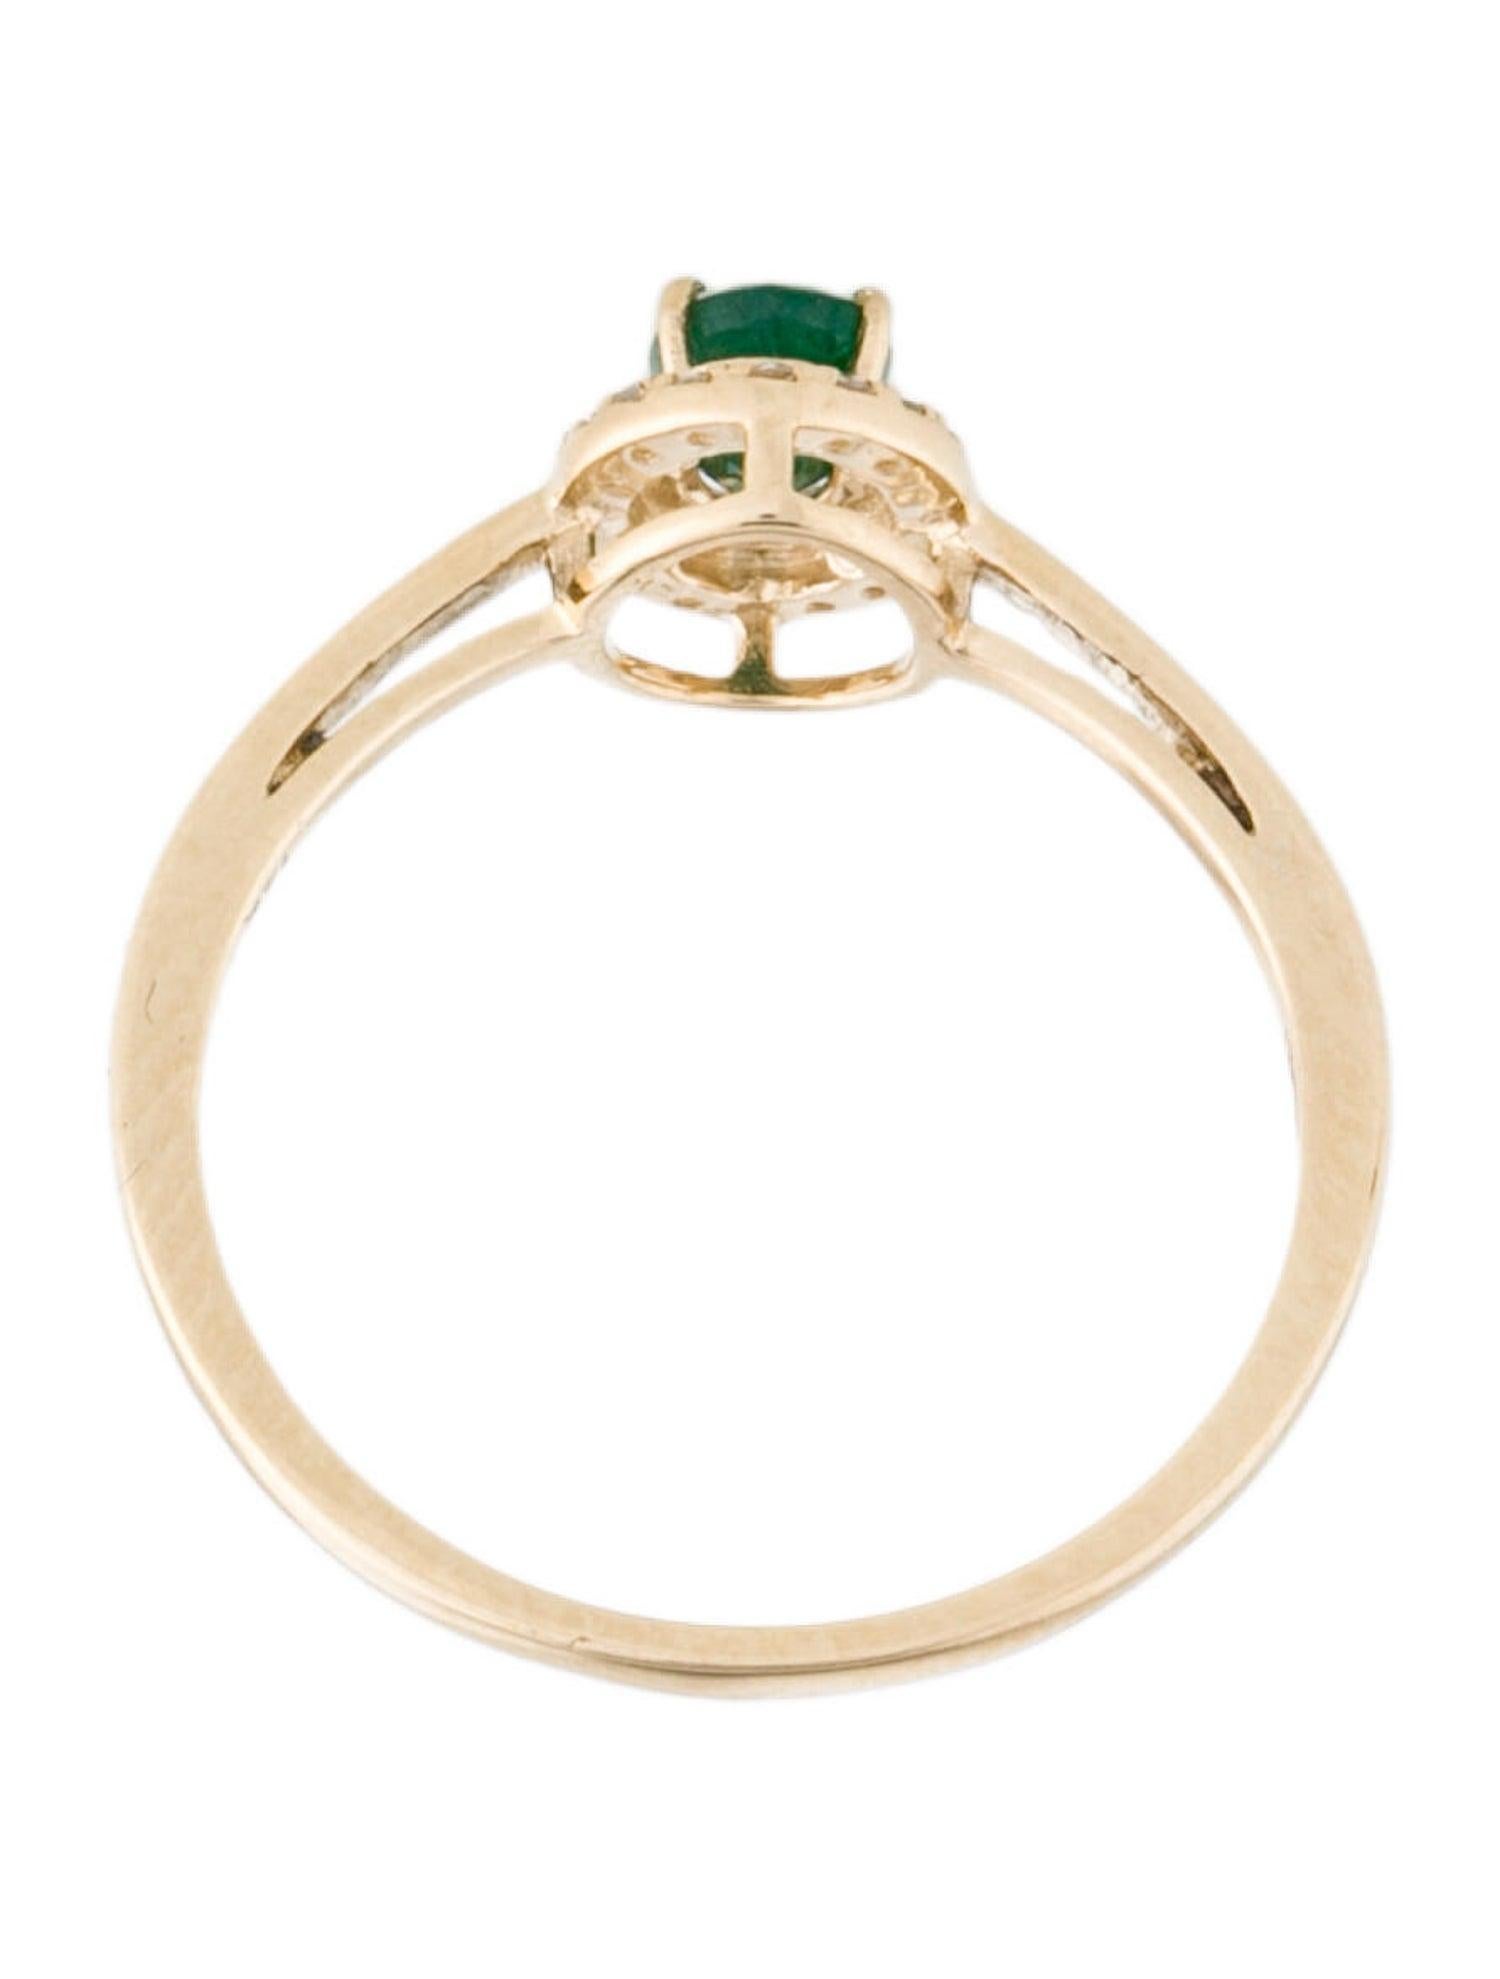 Stunning 14K Emerald & Diamond Halo Ring, Size 7 - Statement Jewelry Piece In New Condition For Sale In Holtsville, NY